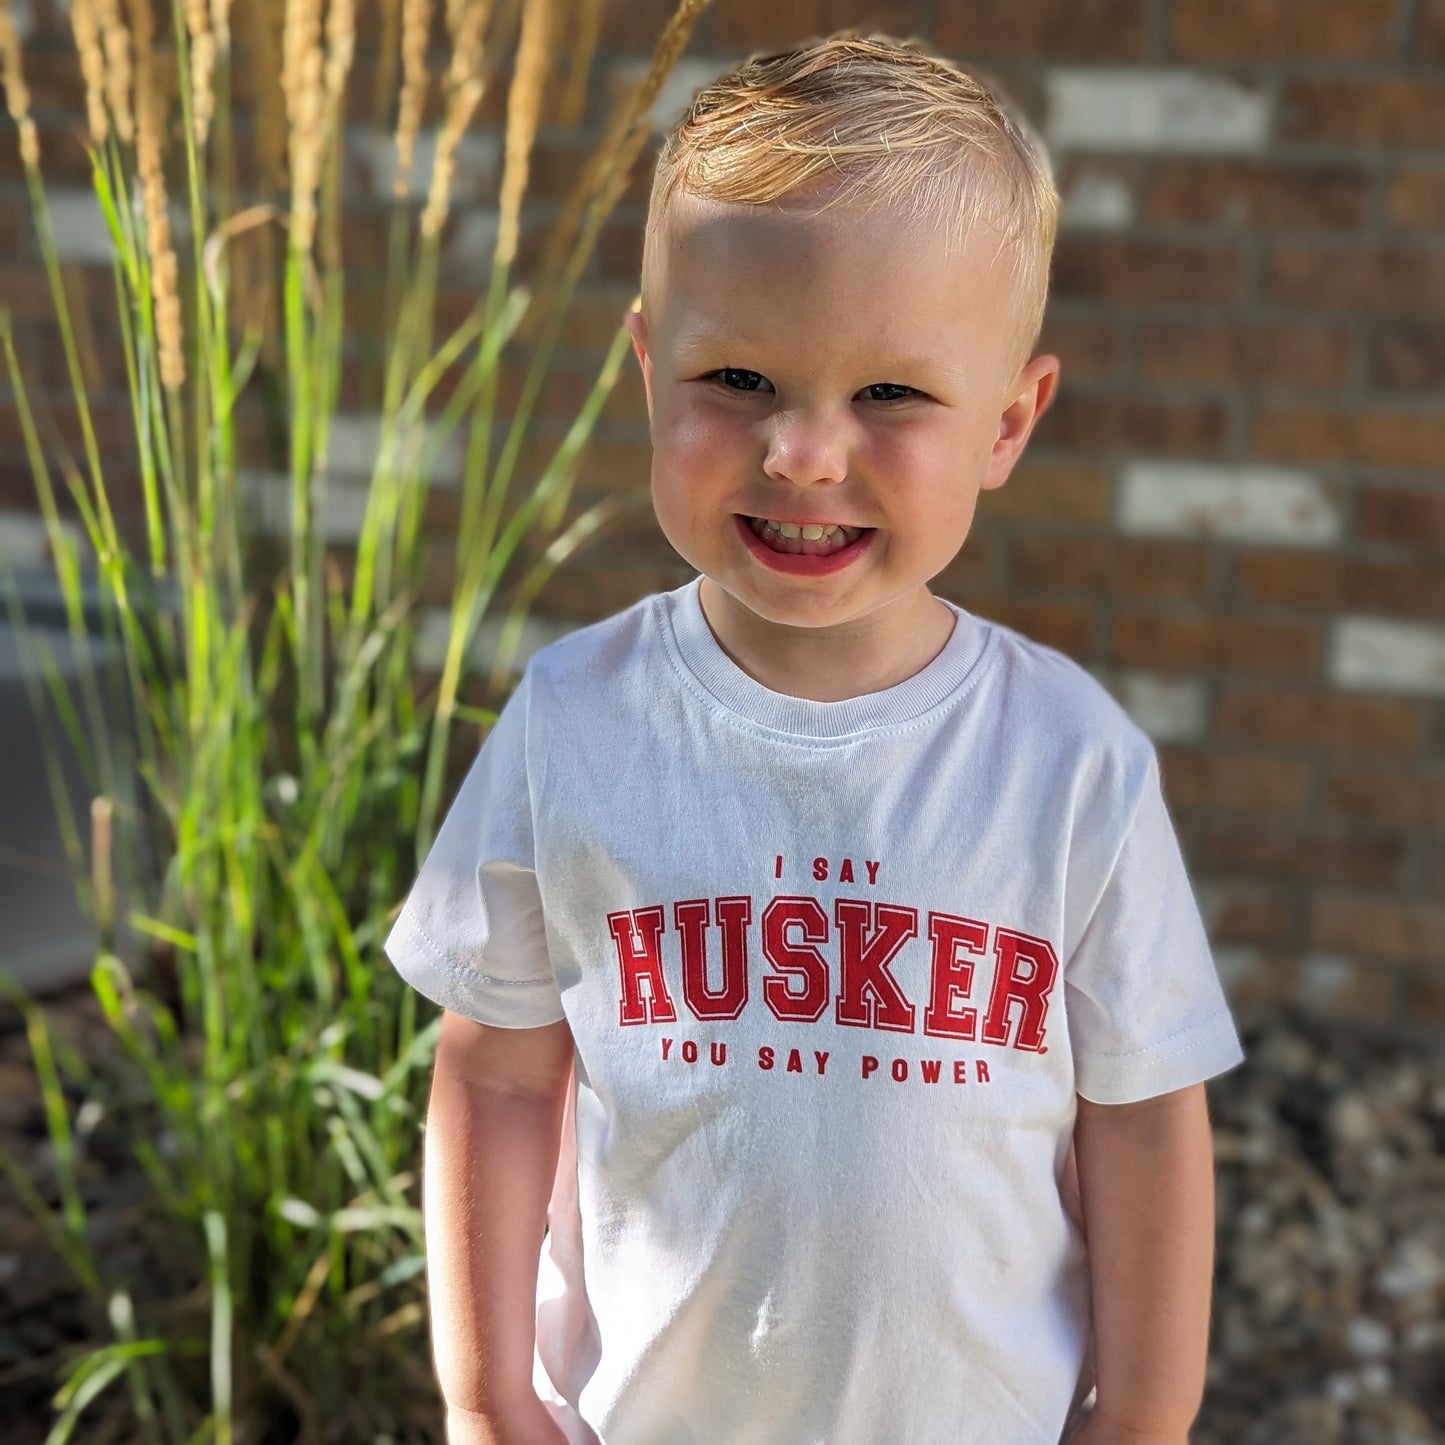 ON SALE - When I Say Husker toddler tee